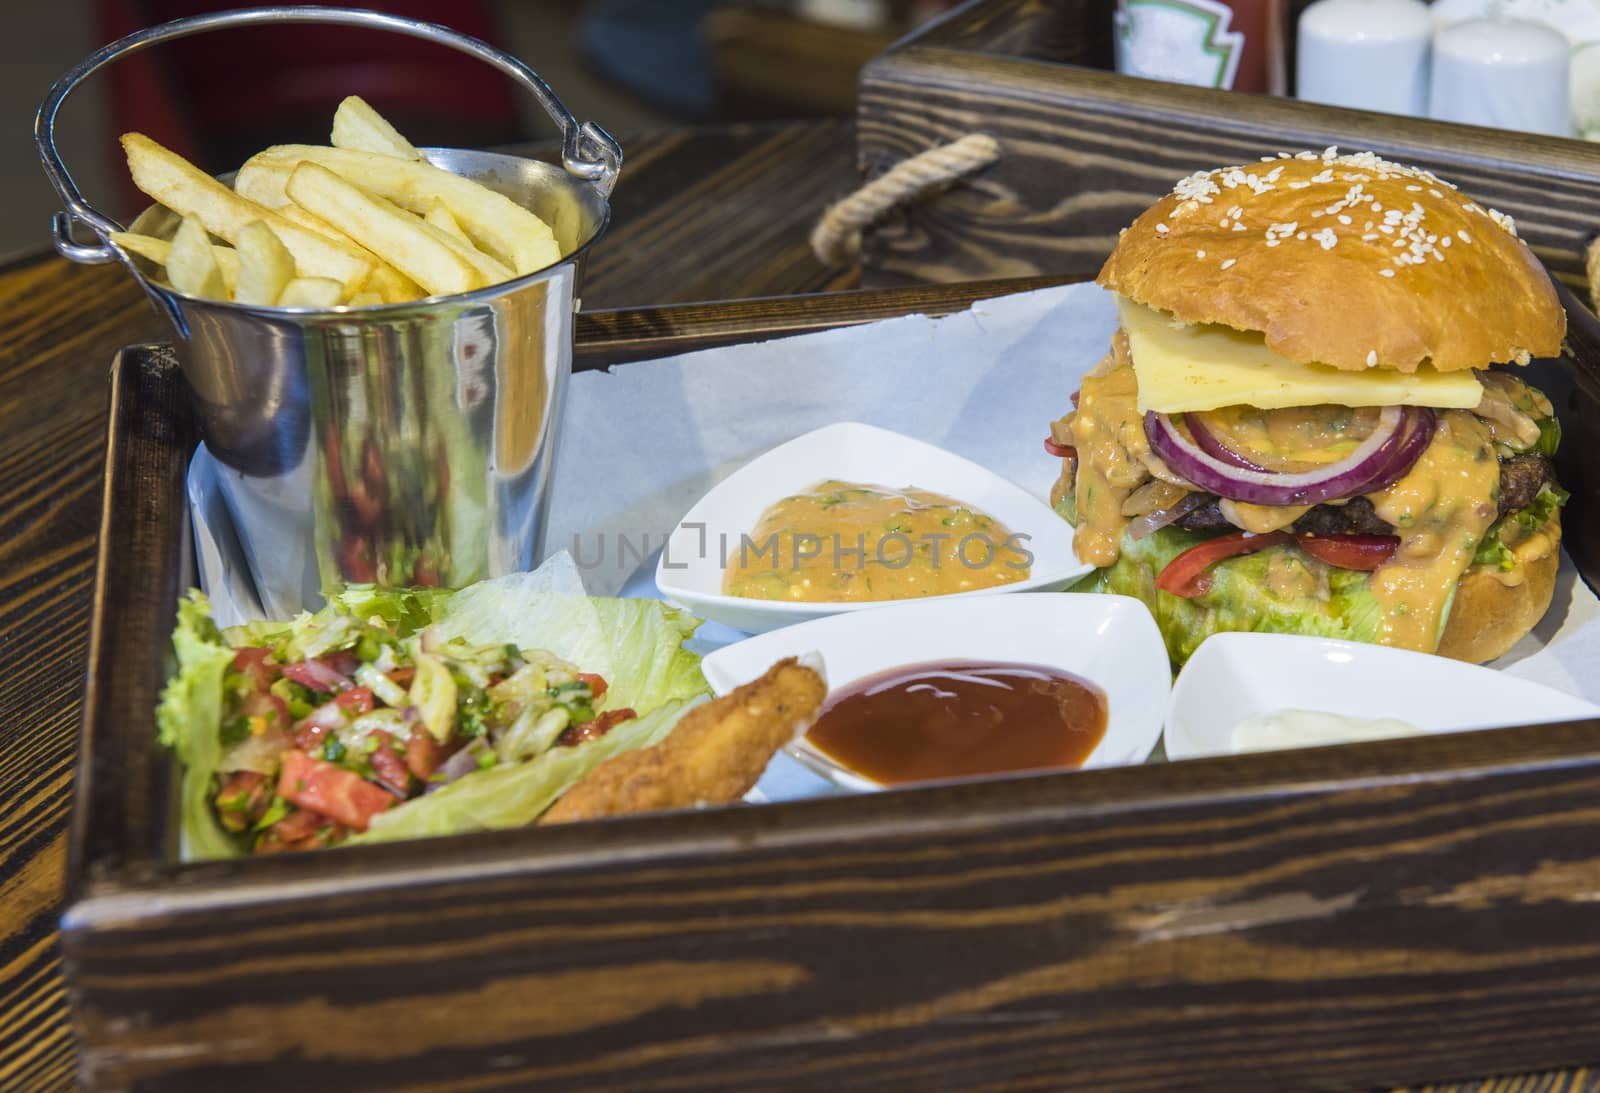 Luxury beef burger and salad meal on a tray with sauces in restaurant